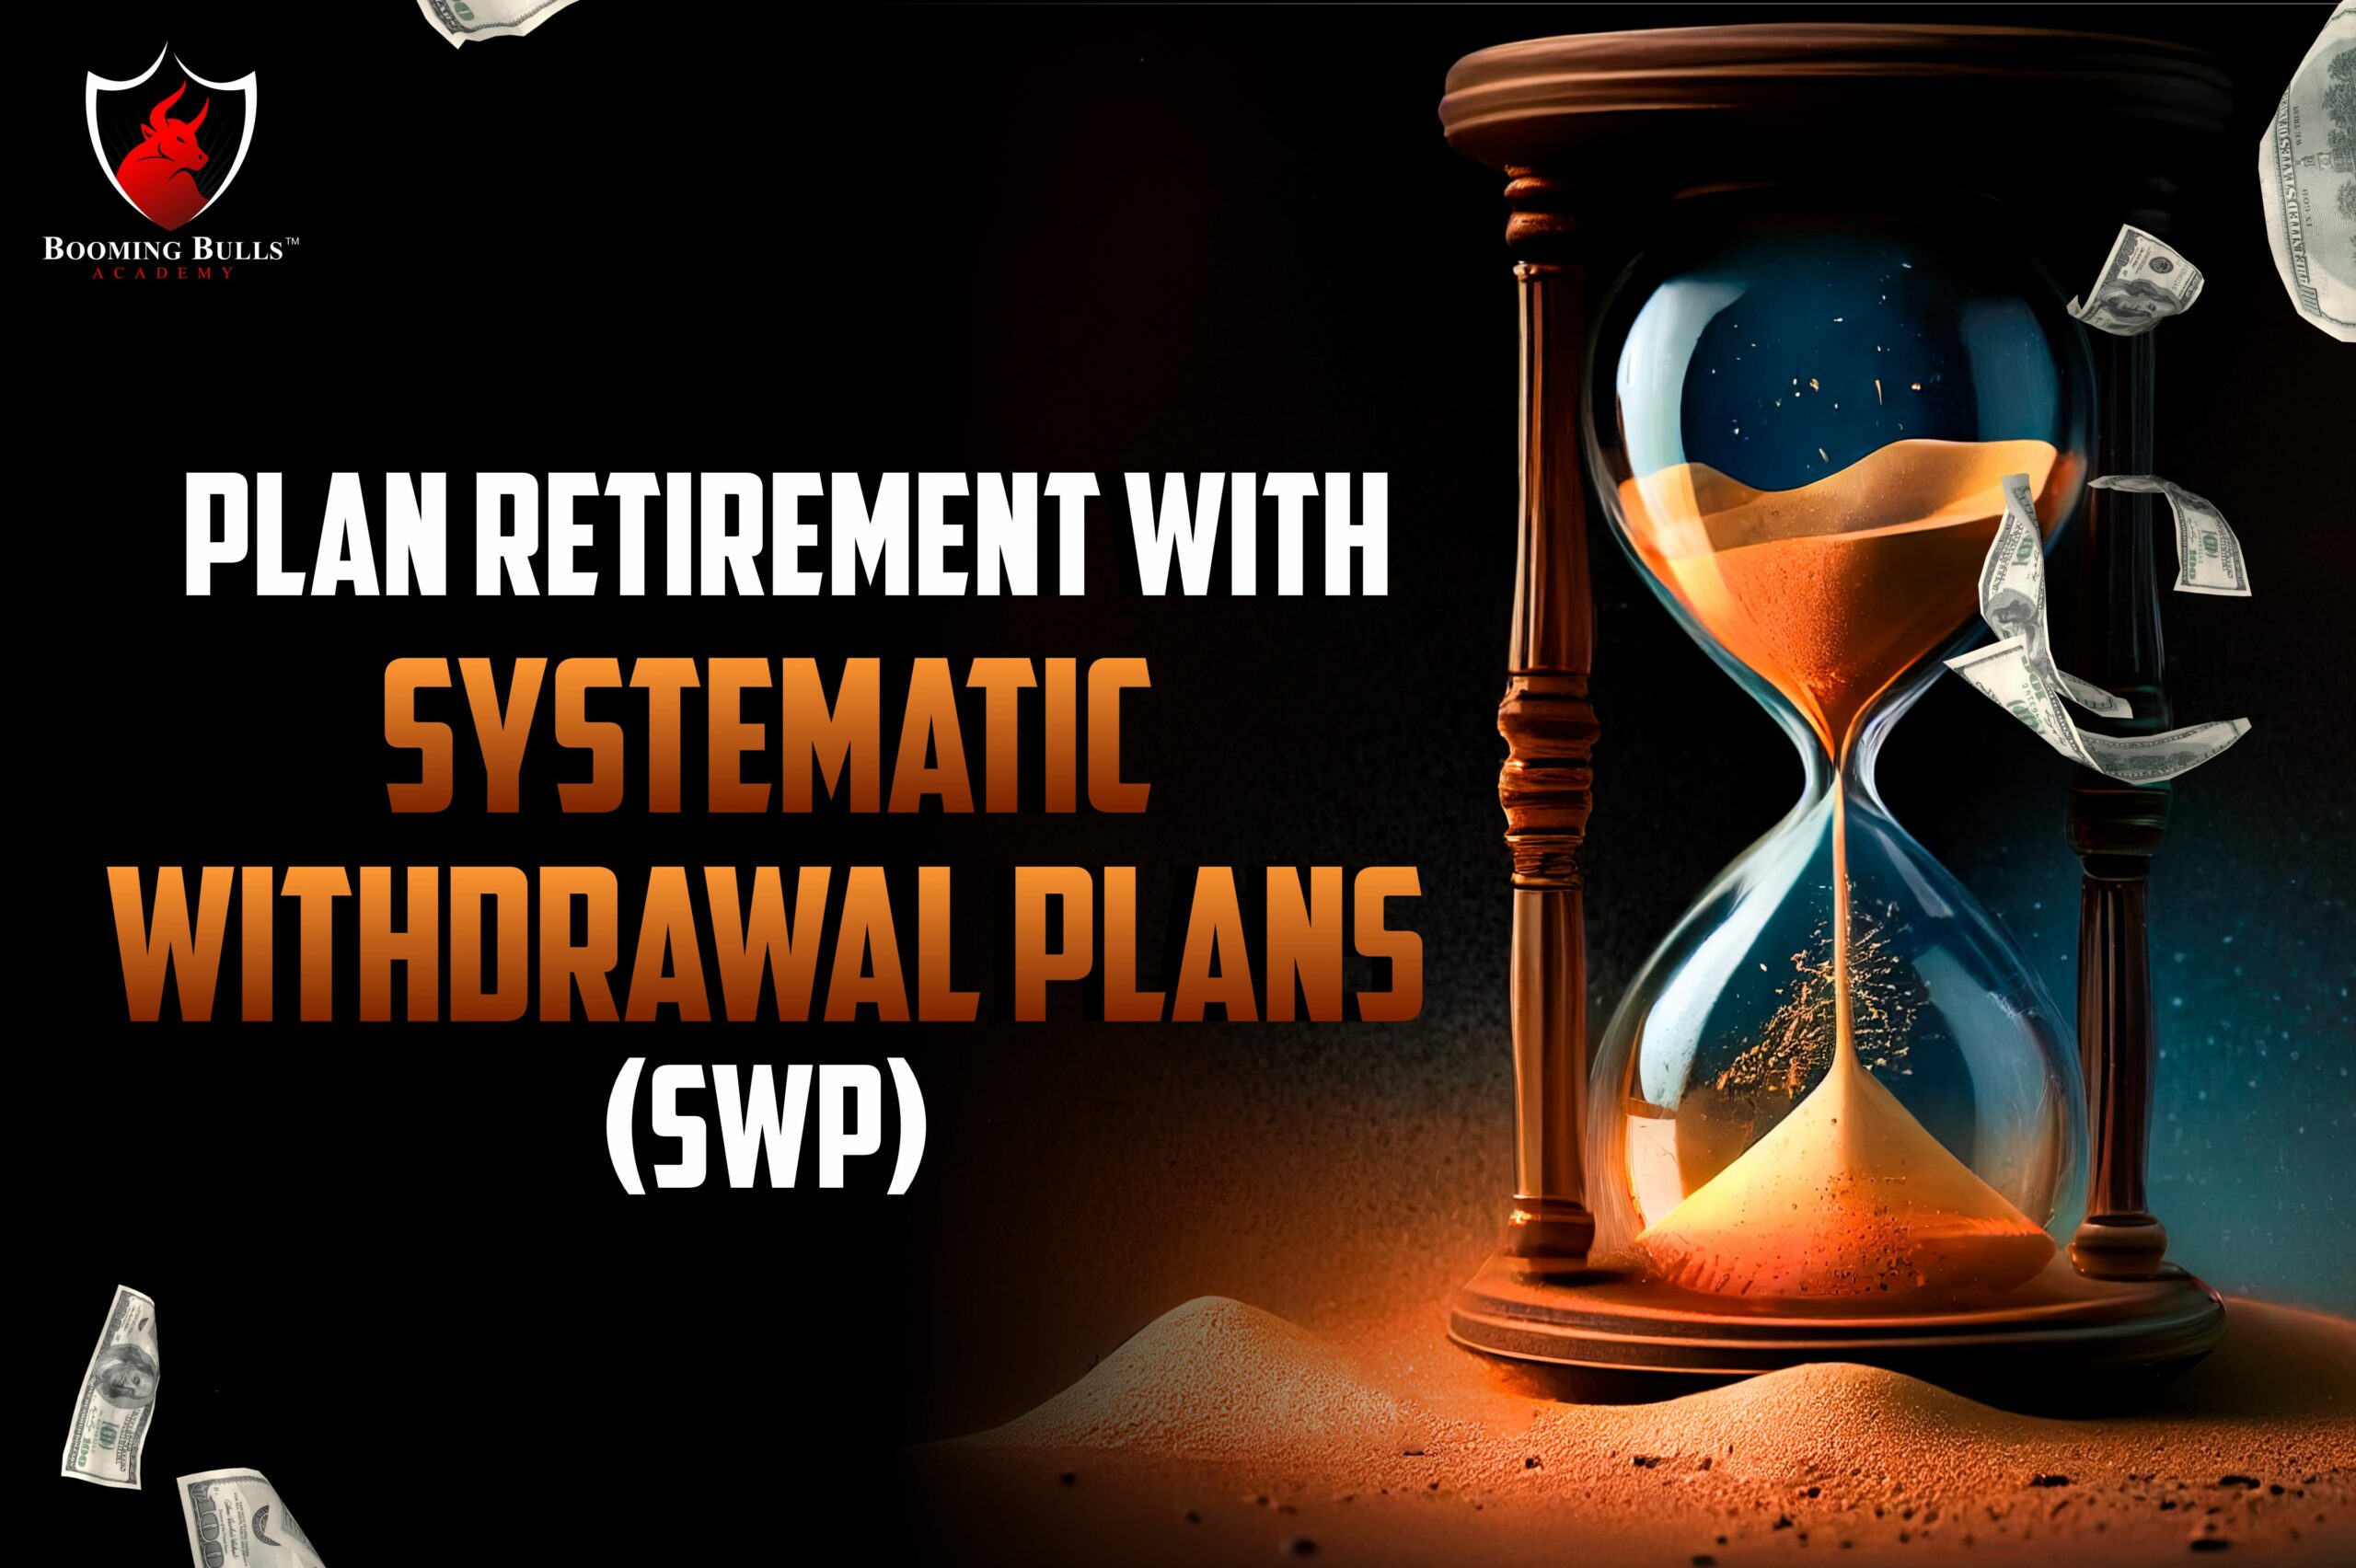 Plan Retirement with Systematic Withdrawal Plans (SWP)